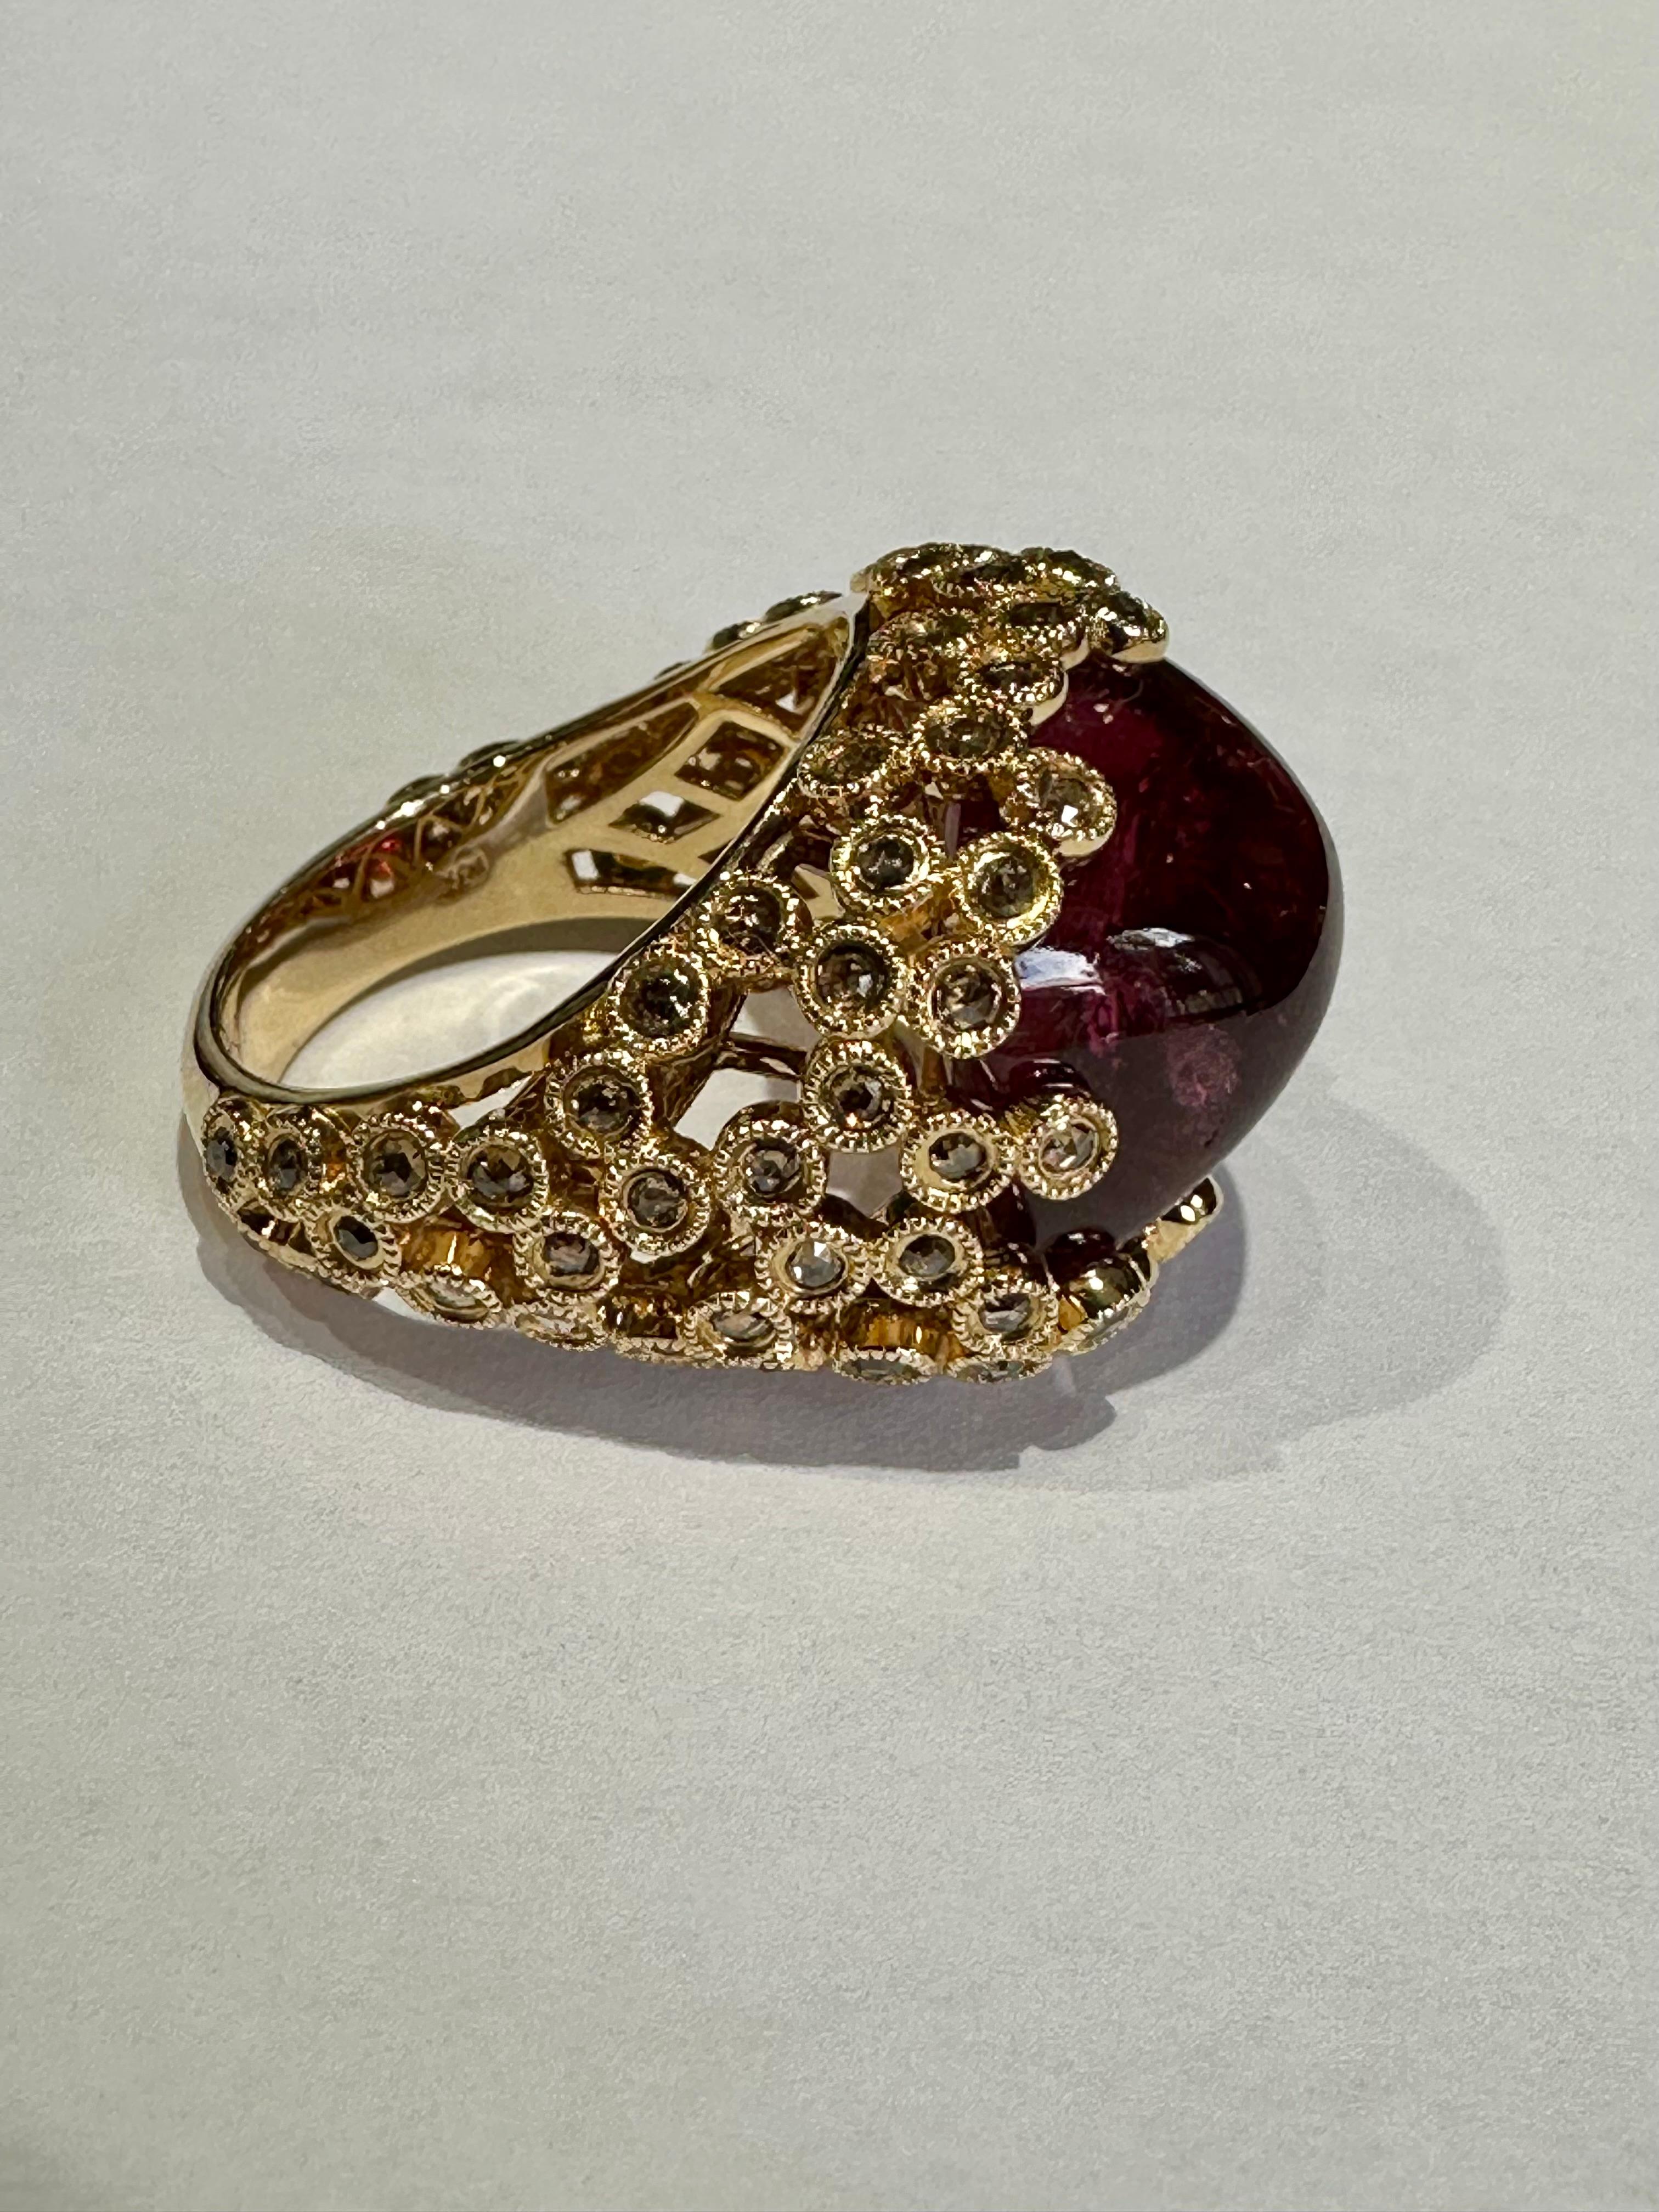 Ladies Hand Made Large Red  Rubellite Sugarloaf Cabochon 18.38 CT and Cognac Diamonds 2.00 Ct 

Ring 14K Yellow Gold.

Description / Condition: New. All jewelry has been professionally scrutinized and cleaned prior to being offered for sale.